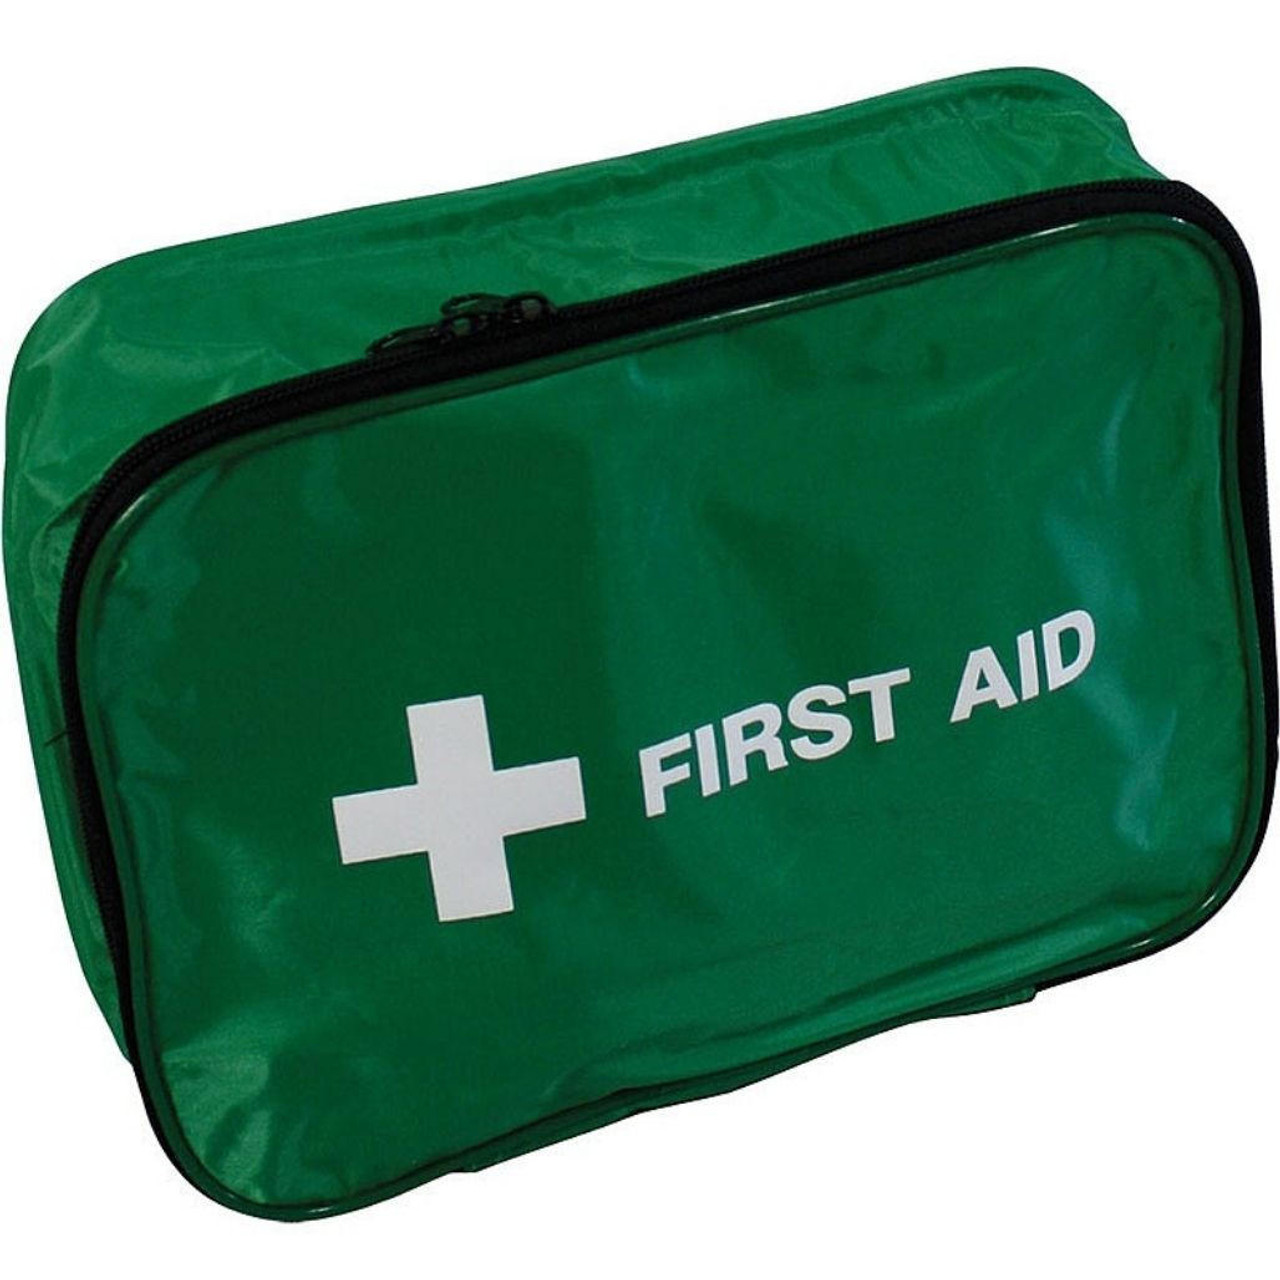 Zafety First Aid Kit Workplace 1 to 10 People HSE Compliant in Nylon Zip Bag